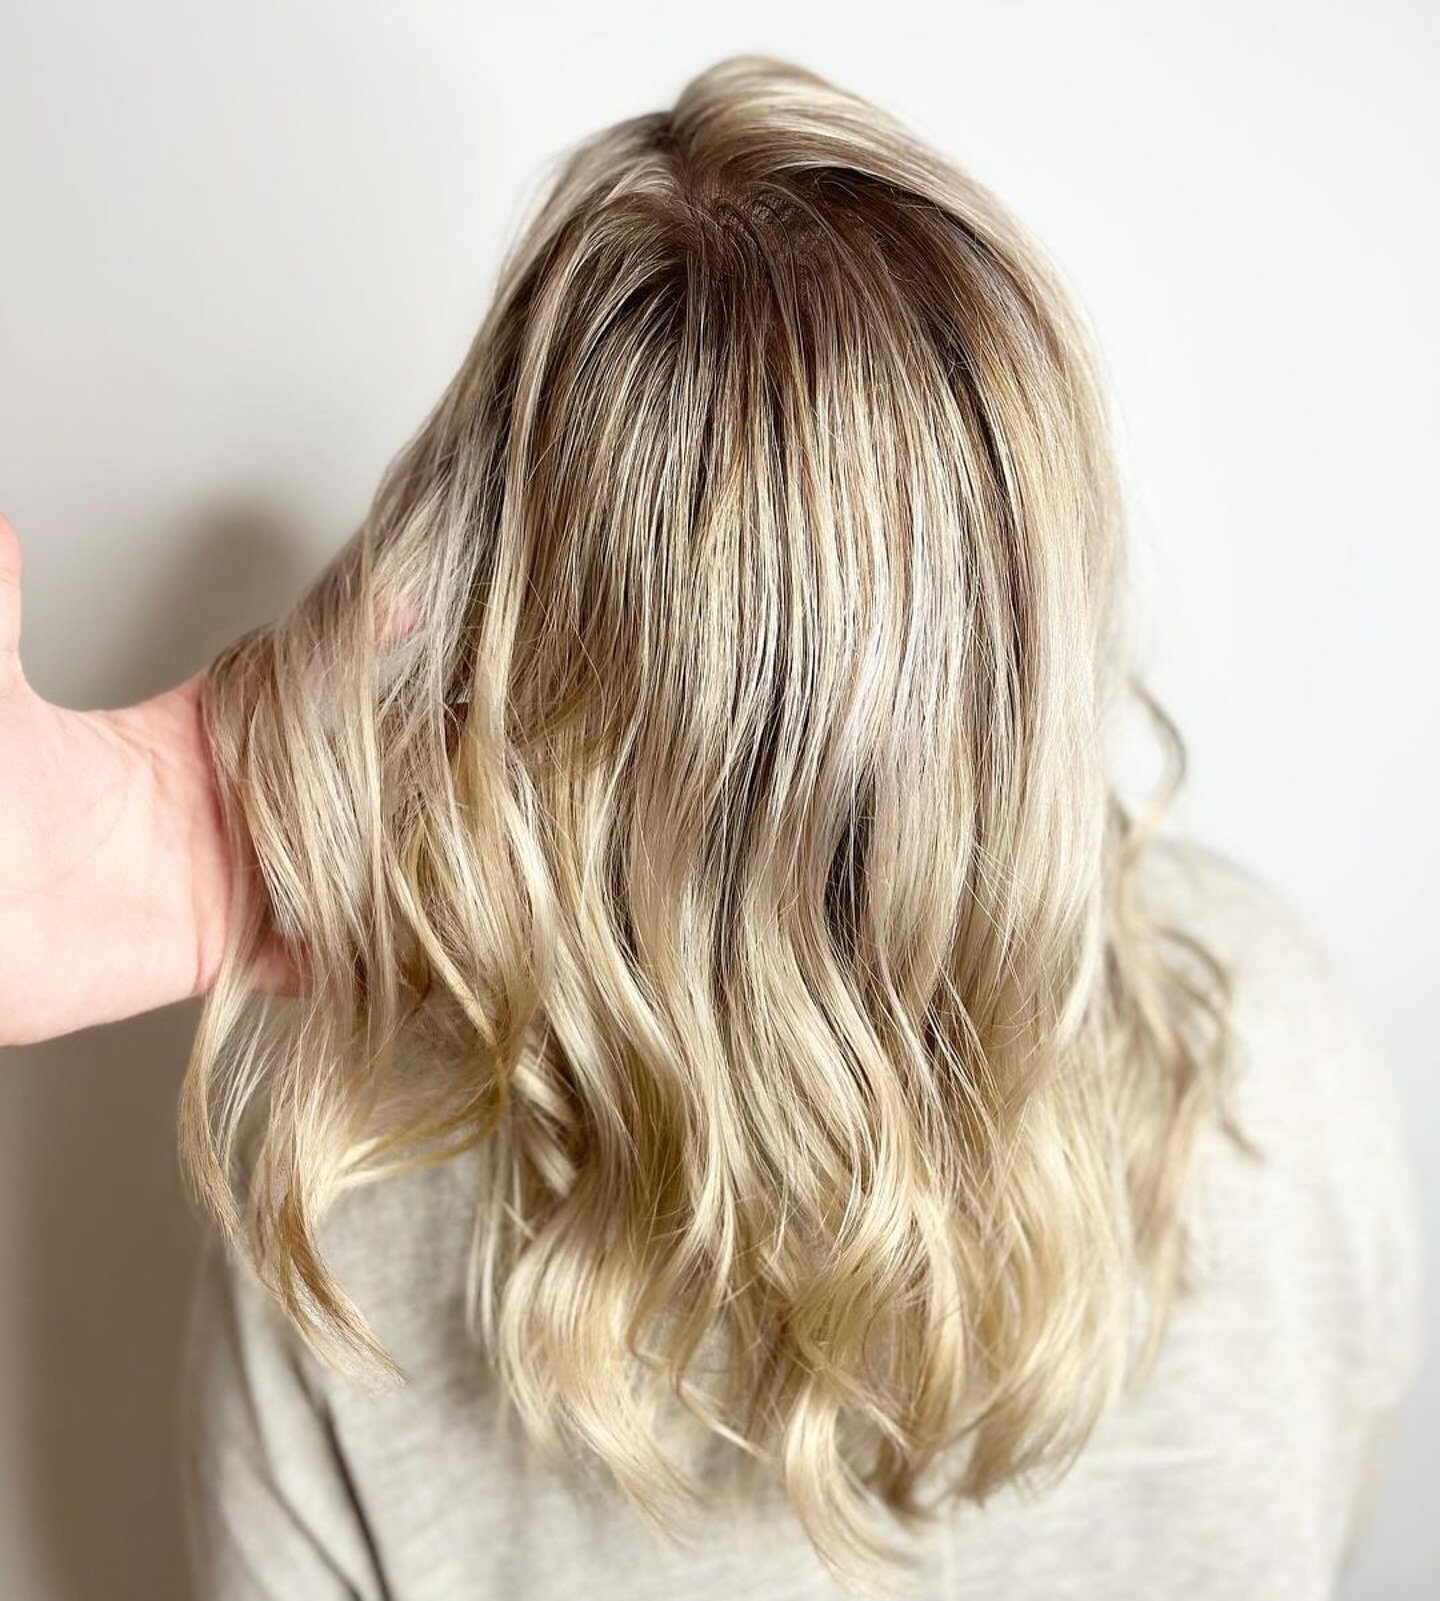 Blonds might have more fun but it still needs to have the appropriate cut and finish. We focus our attention on the total look, not just one part. We believe every aspect has to work together (cut, color, products) to make your look the prettiest it 